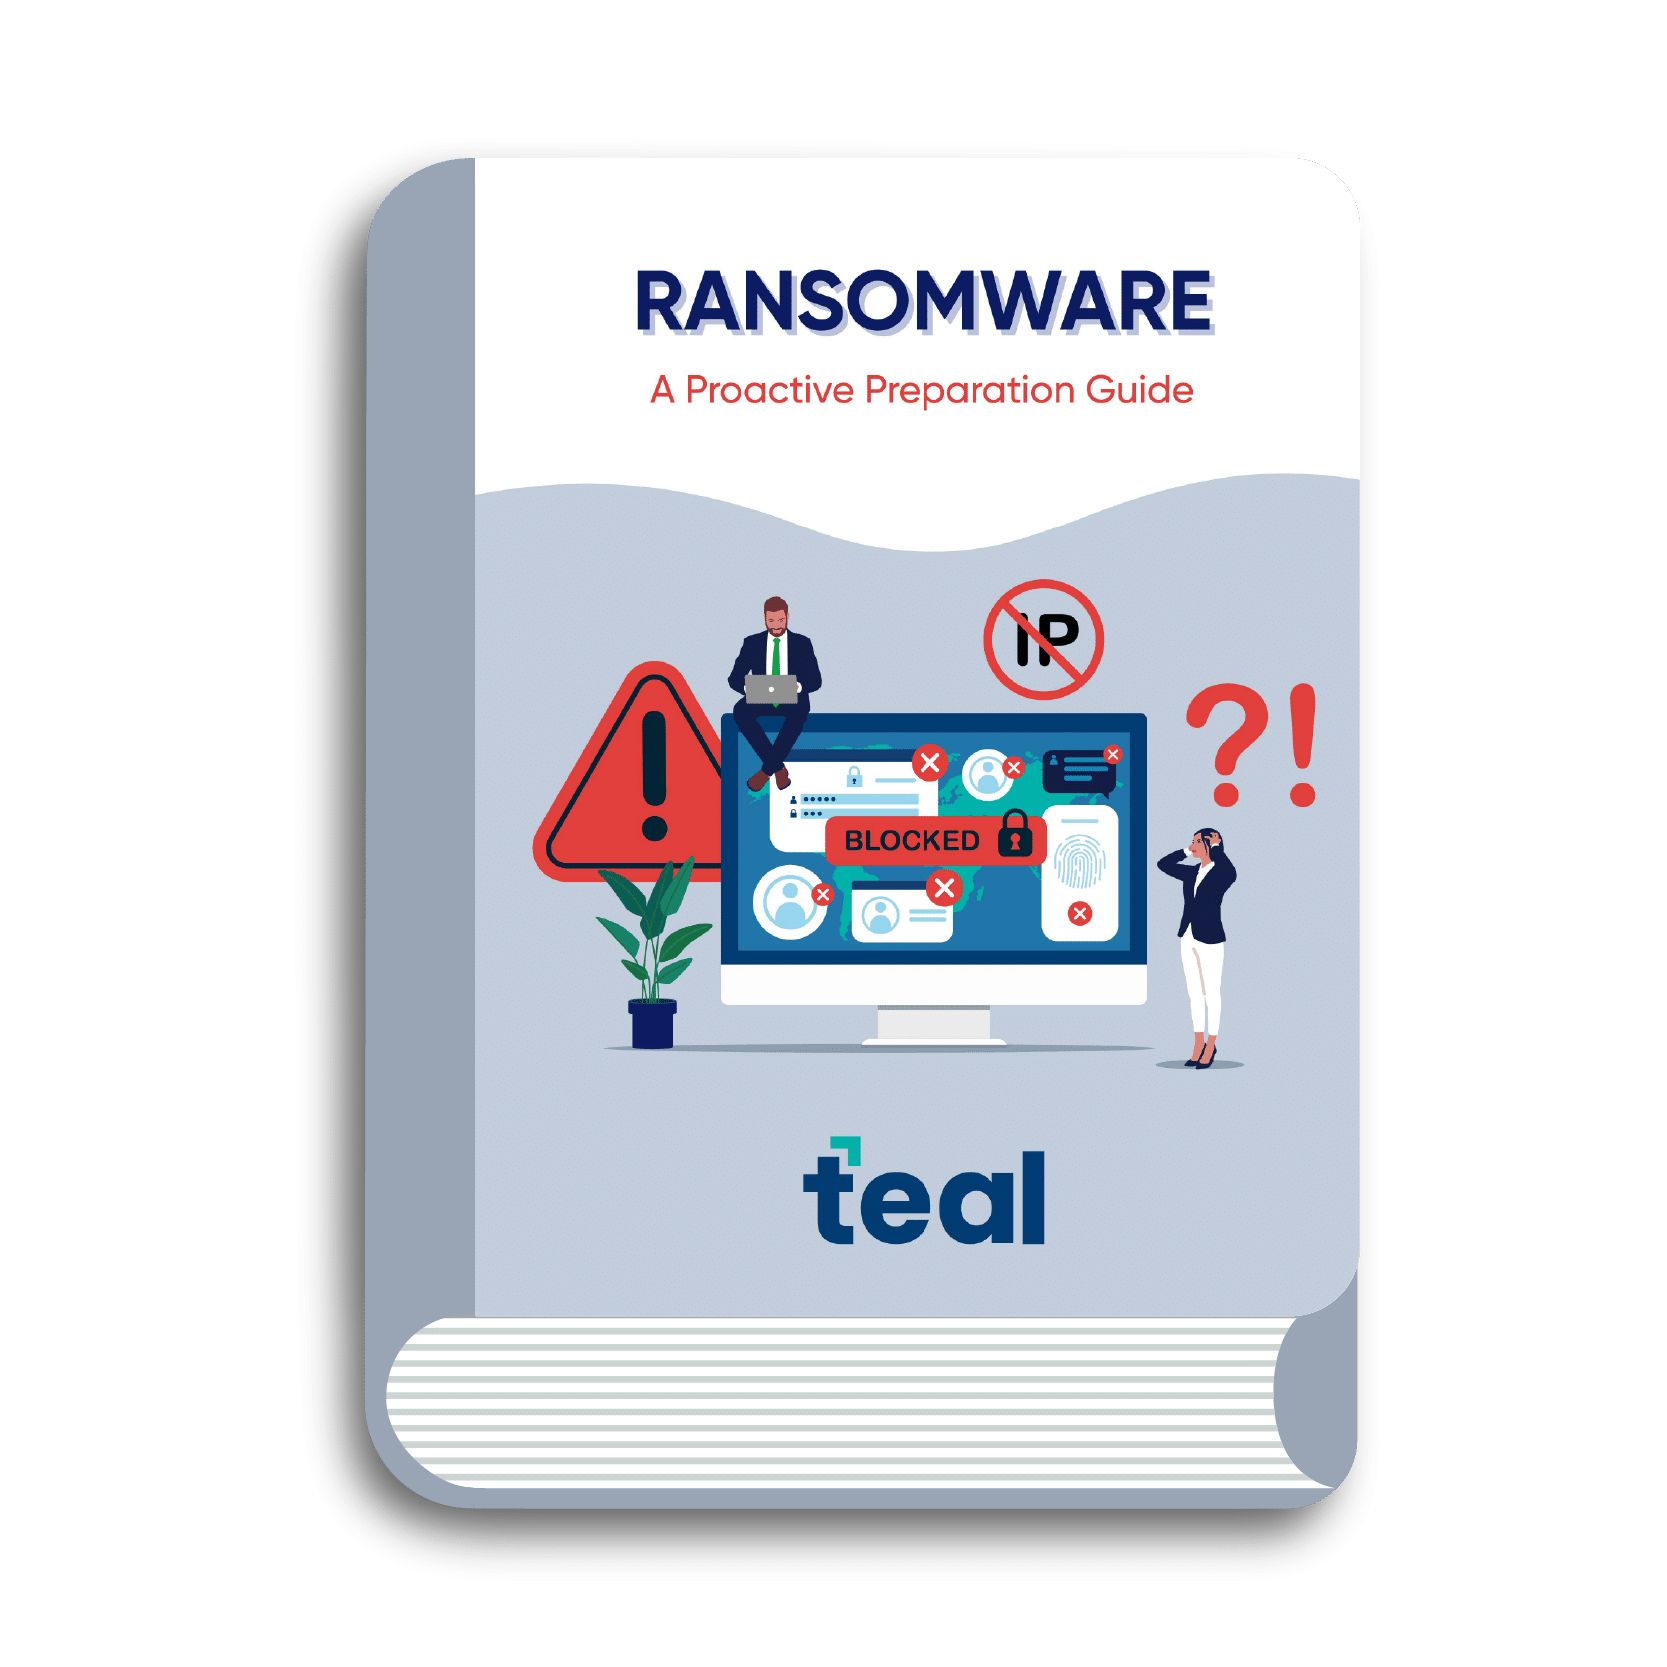 Ransomware: A Proactive Preparation Guide